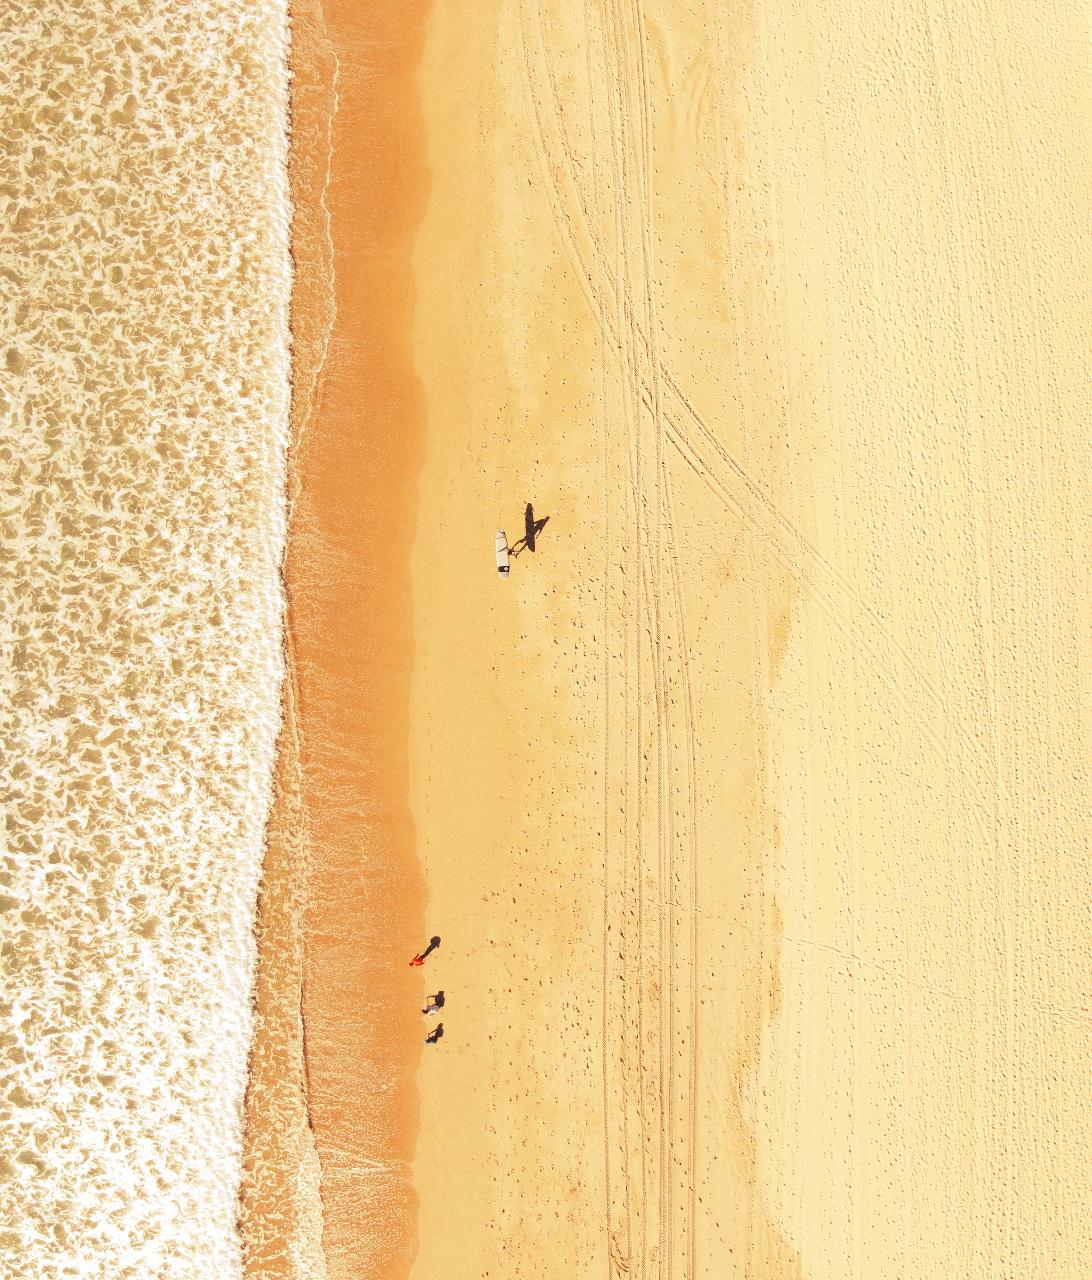 Aerial photography, drone photography by Dronebookers